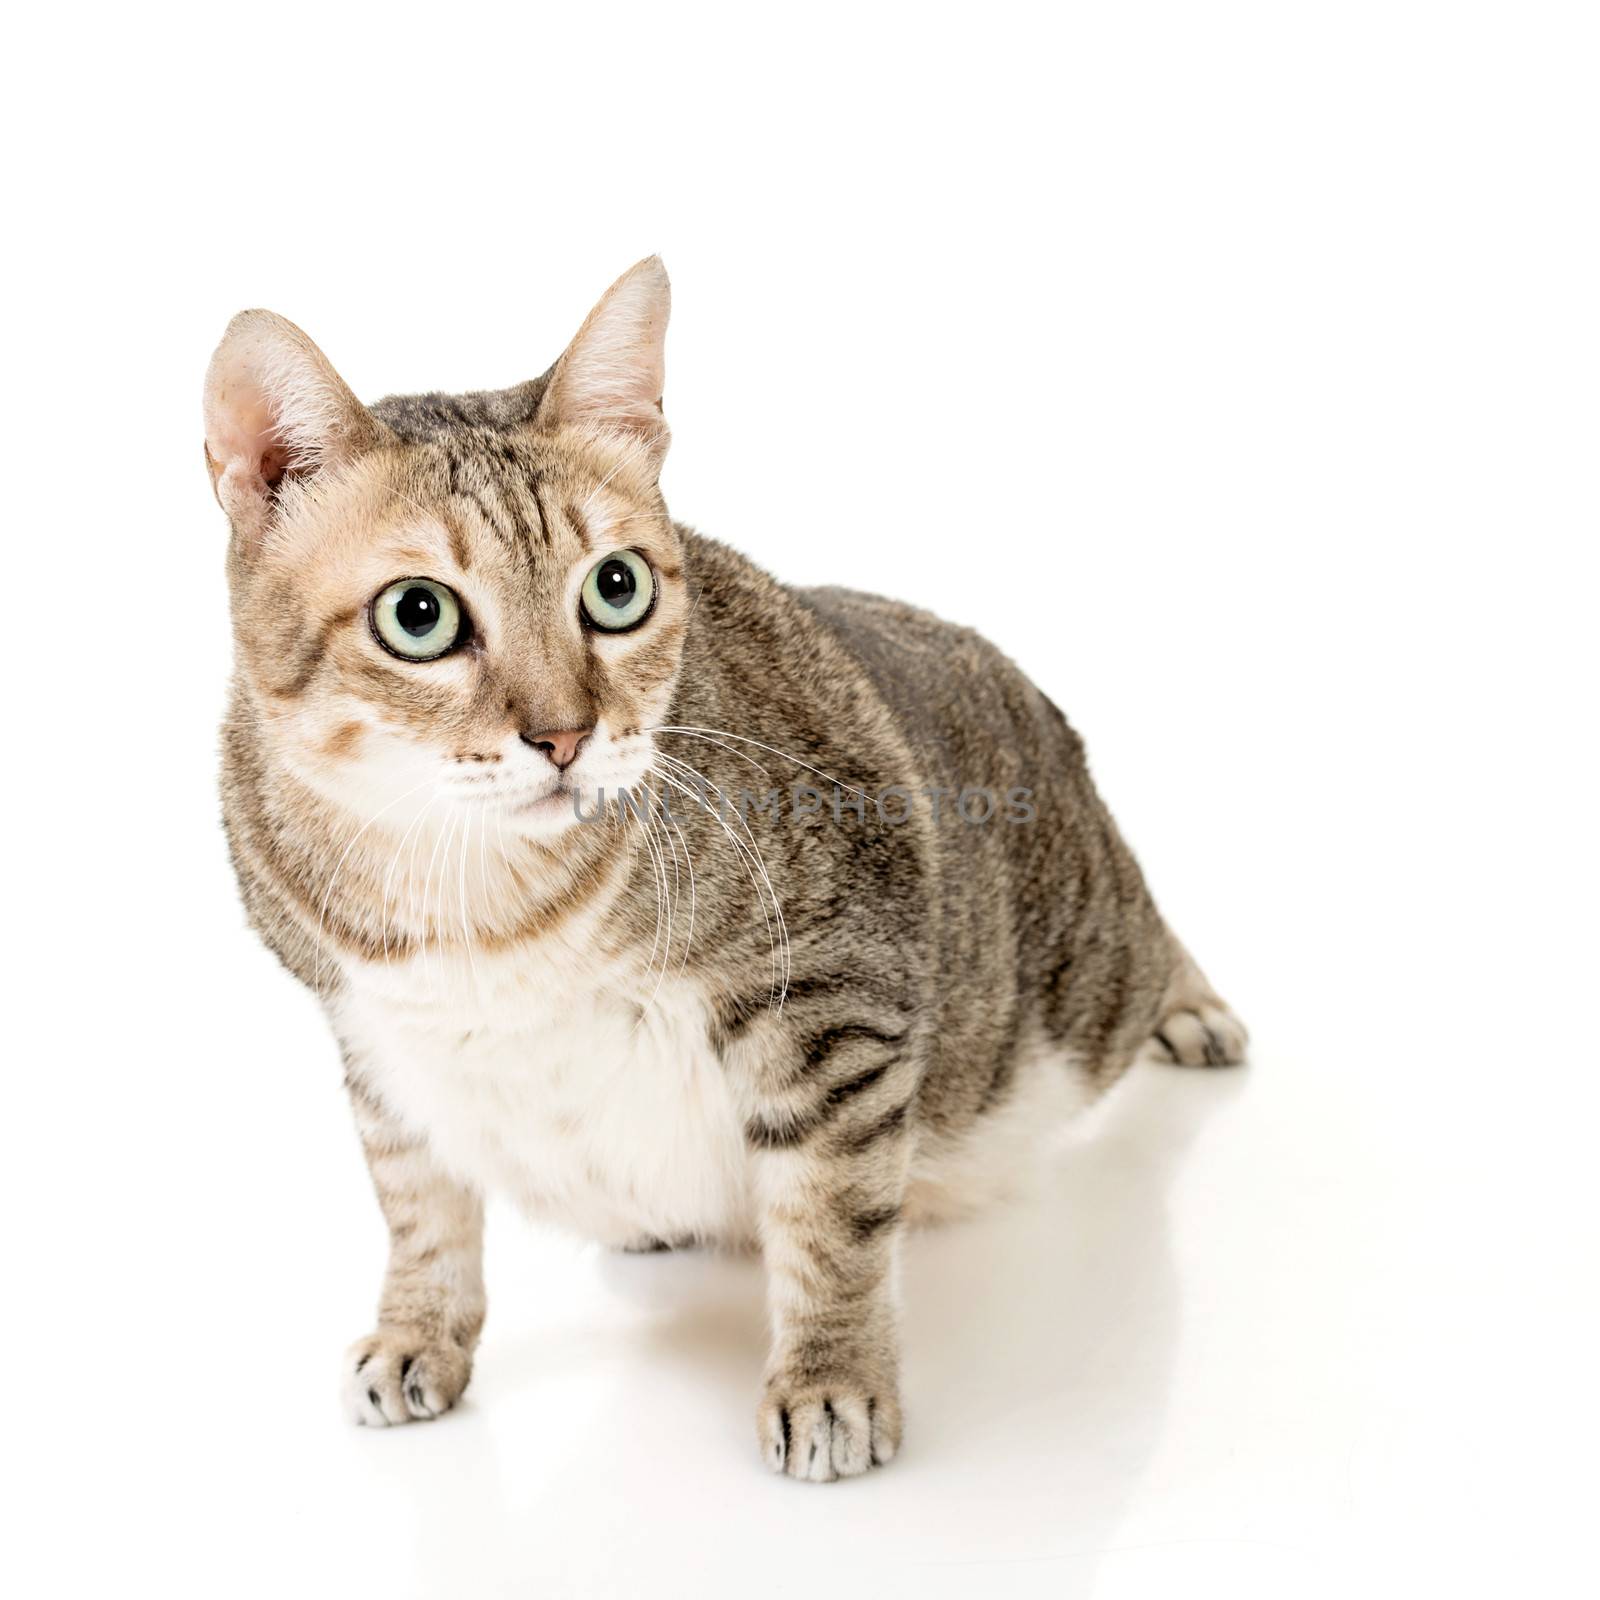 Cute tabby cat with curious expression, full length portrait isolated on white background.